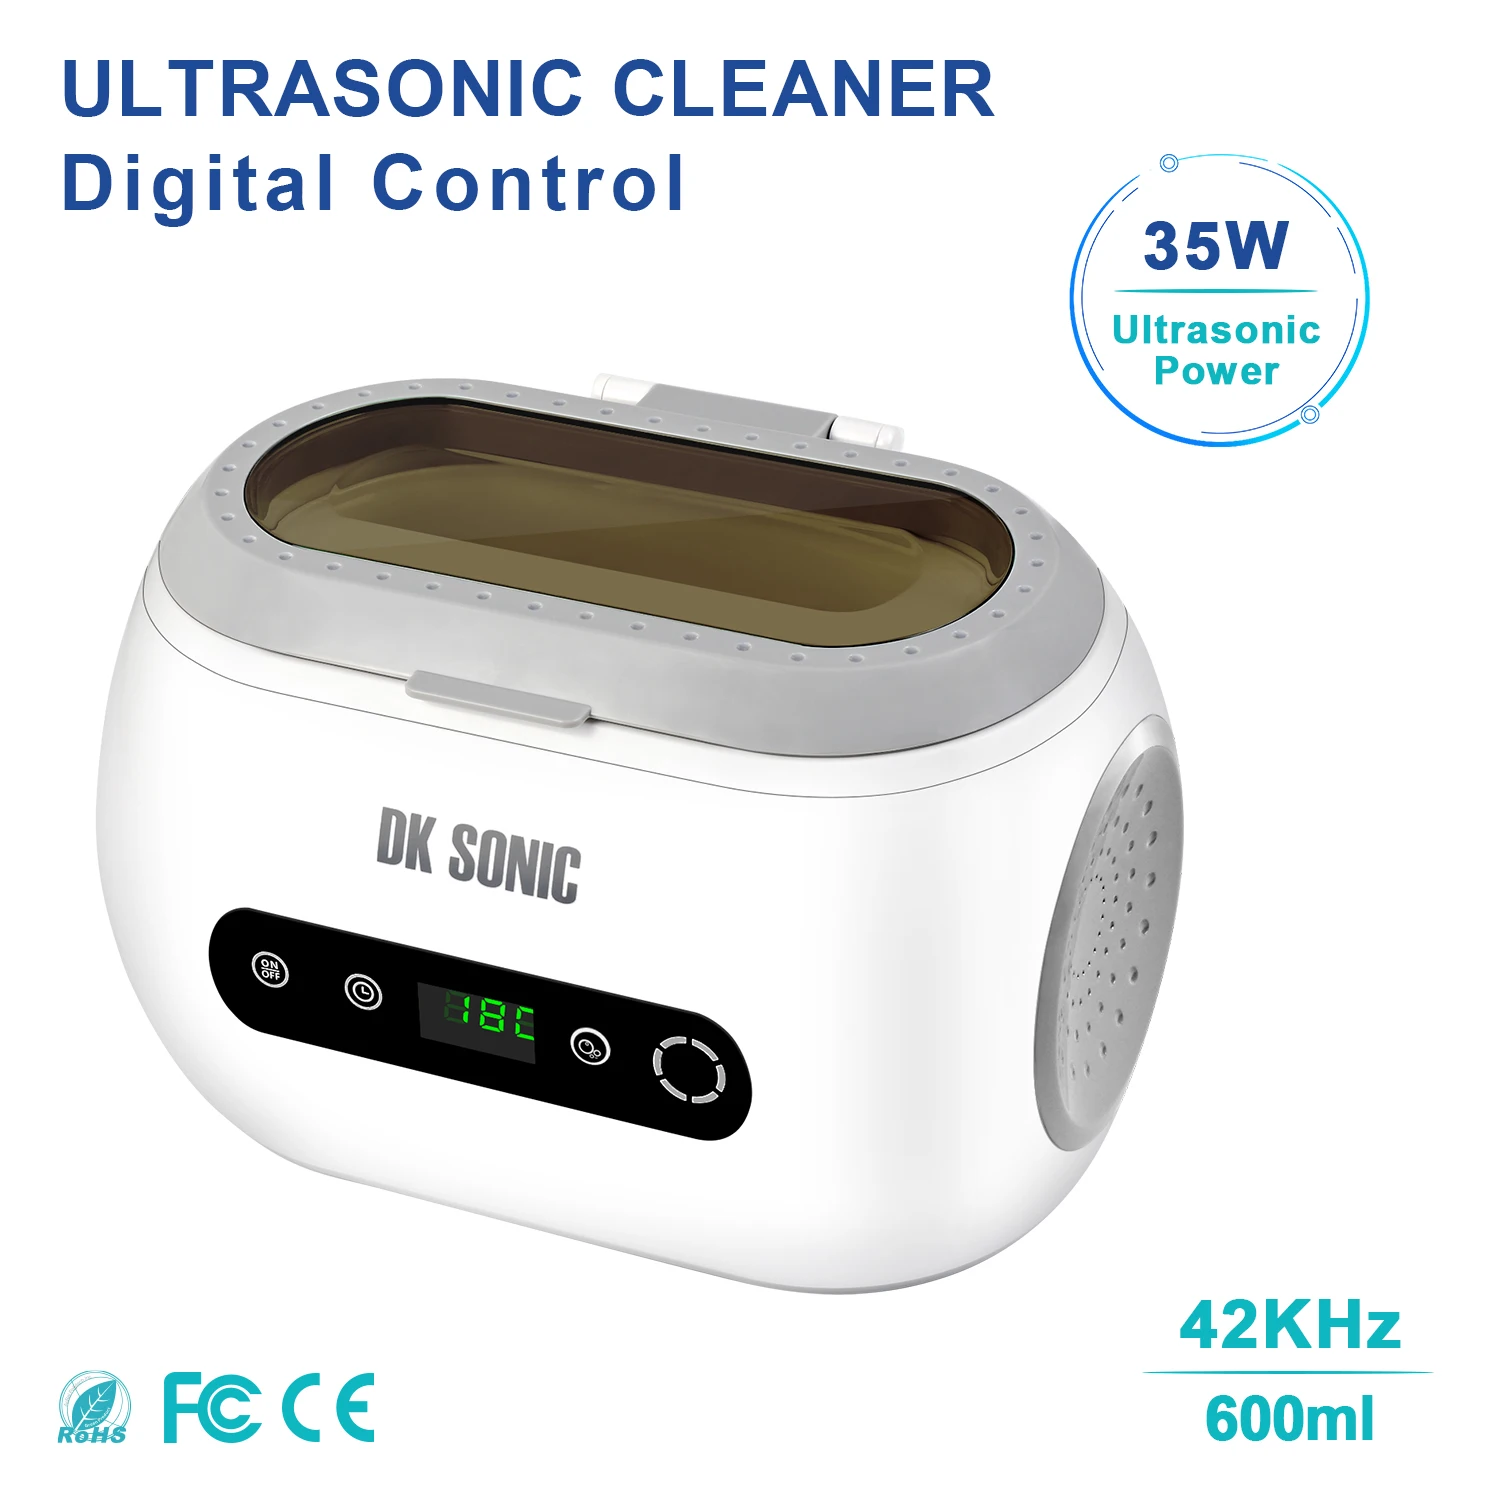 

DK SONIC Ultrasonic cleaner 600ml 35W Ultrason cleaner bath with heater timer and basket for cleaning jewelry brass Sonic Cleane